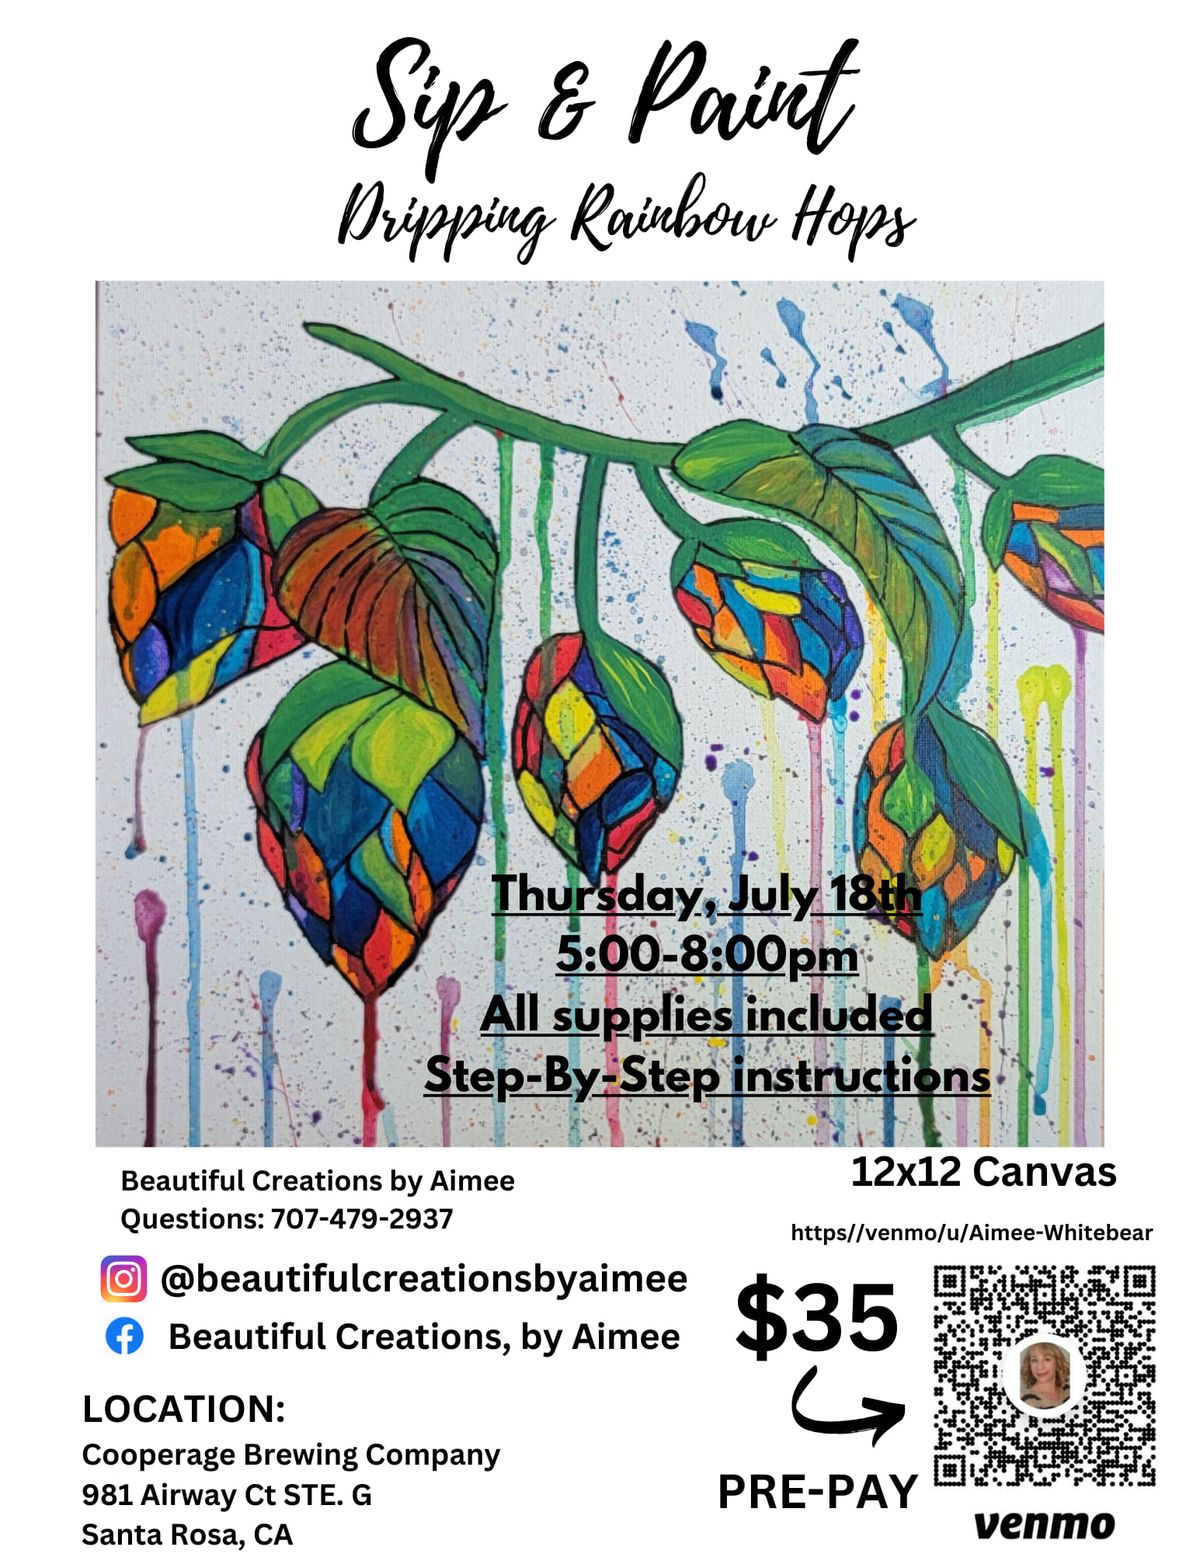 Dripping  Rainbow \ud83c\udf08 Hops Sip & Paint Party